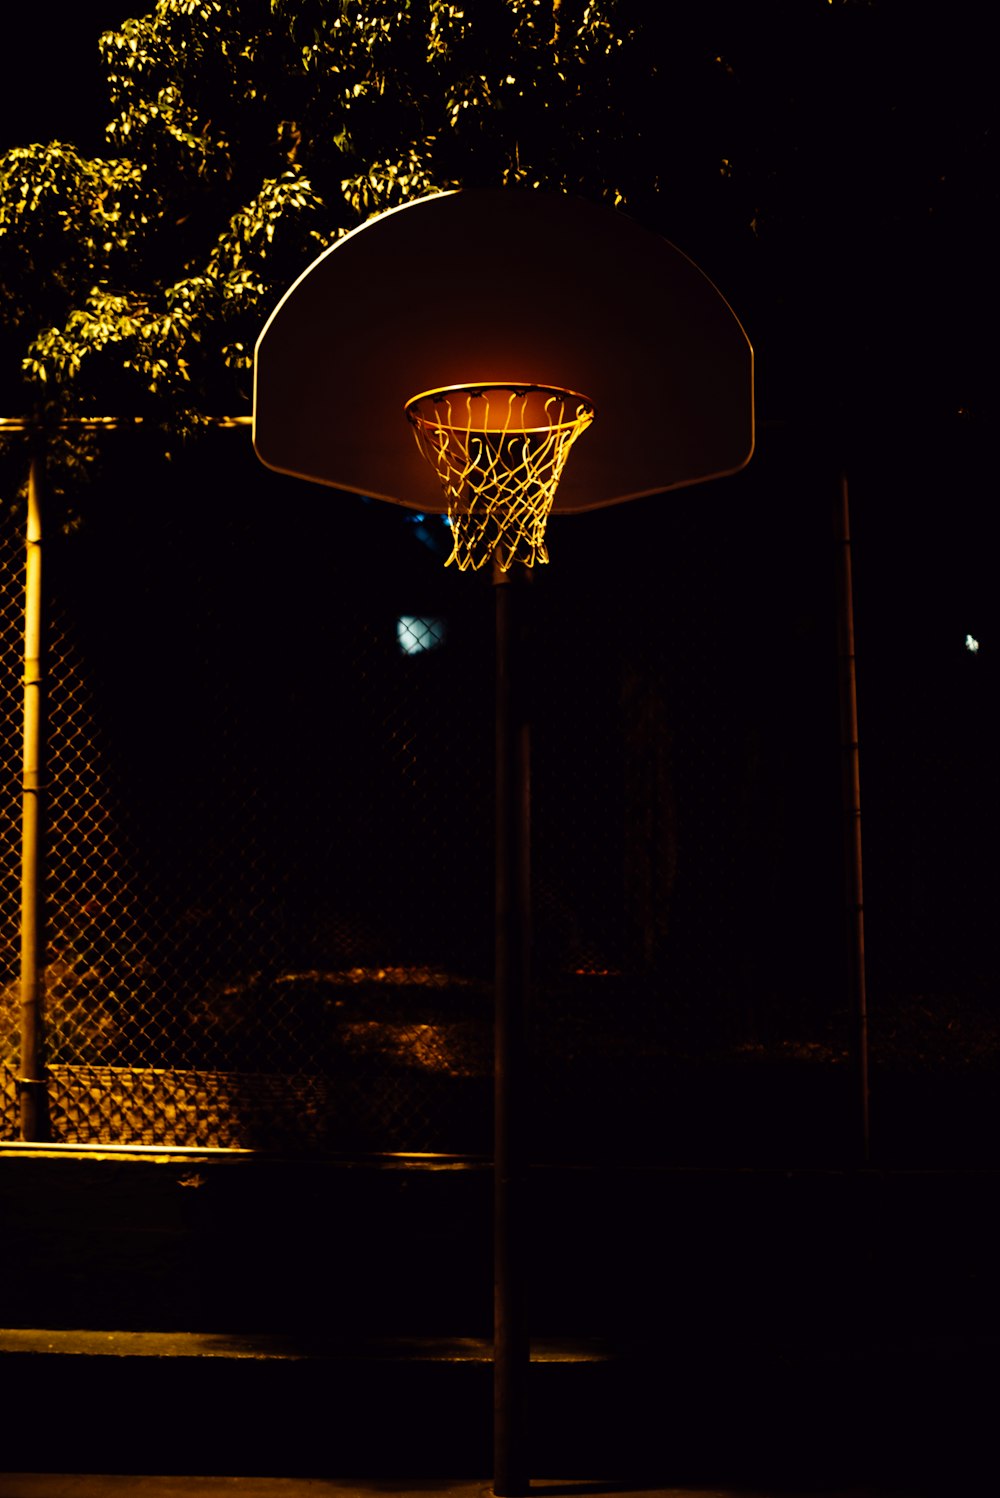 brown and white basketball hoop with net